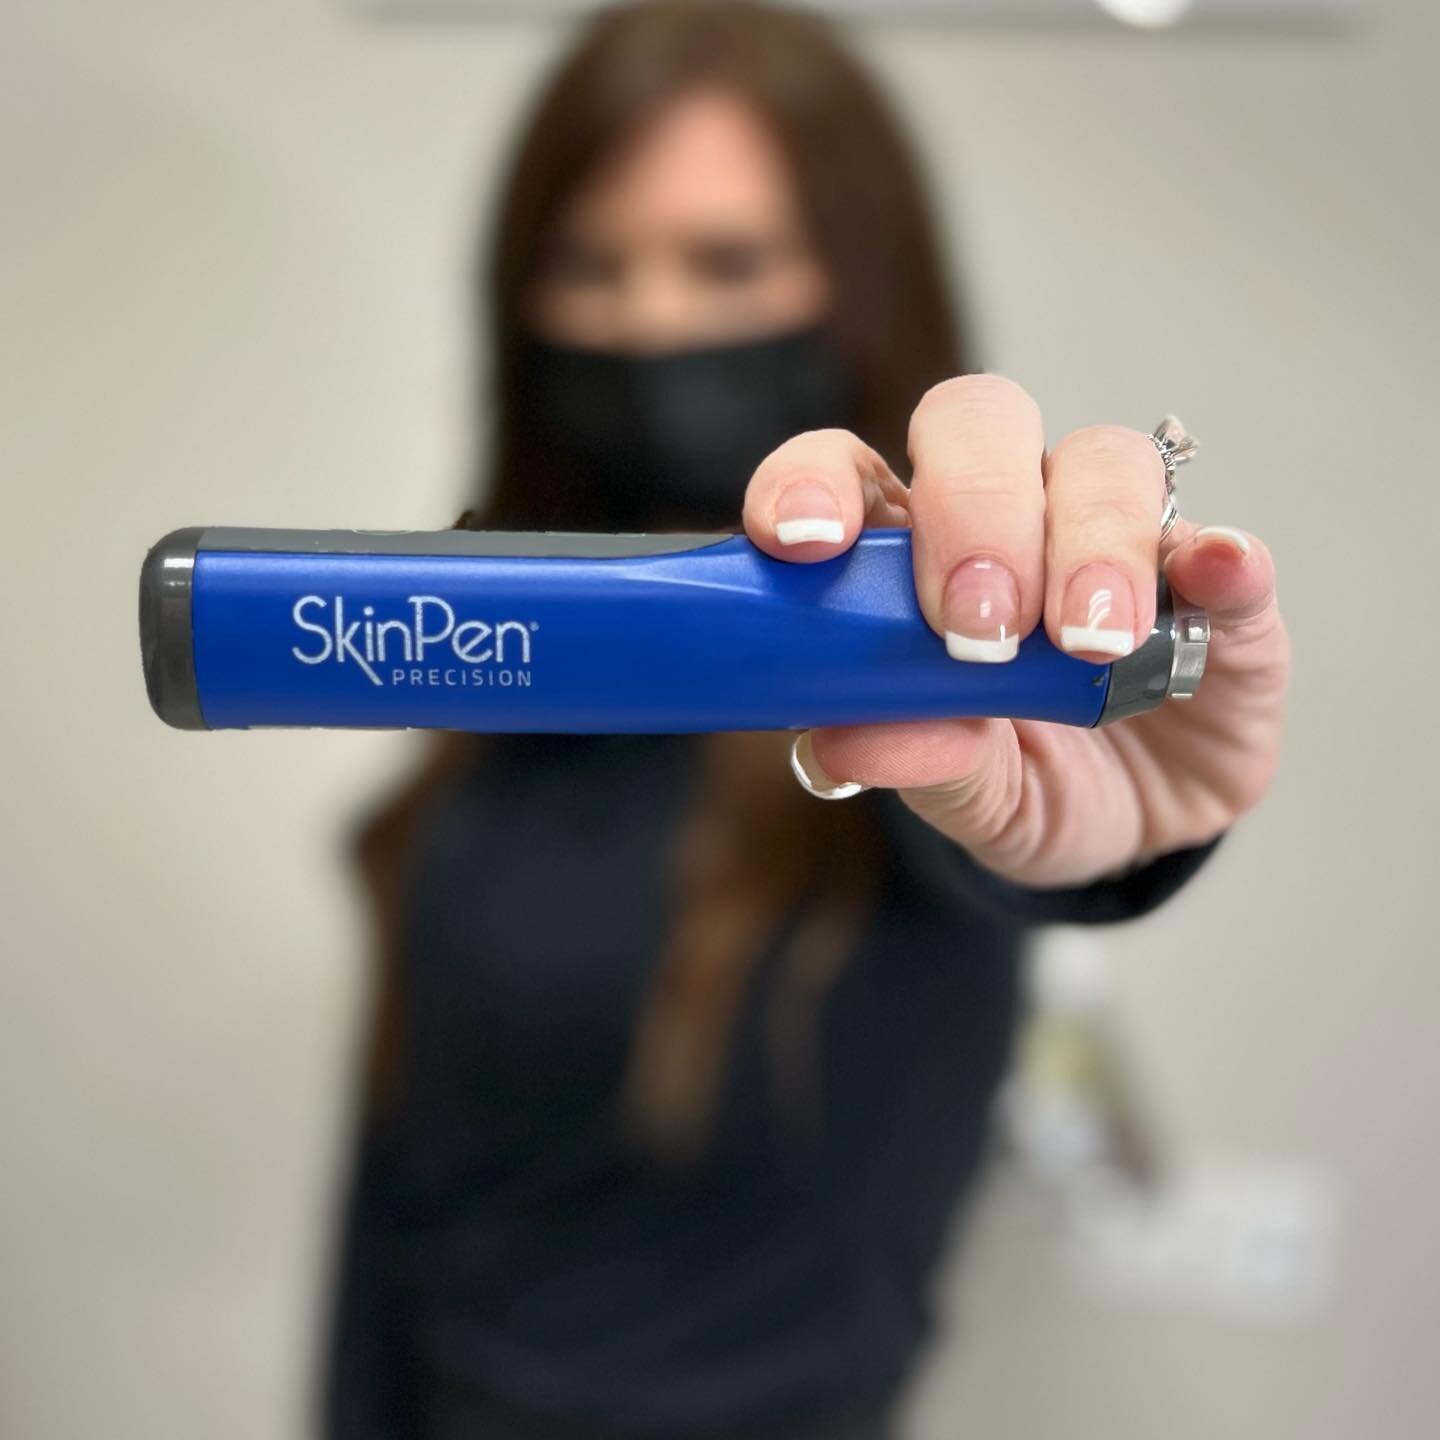 𝗧𝗵𝗲𝗿𝗲 𝗶𝘀 𝗮 𝗕𝗜𝗚 𝗗𝗜𝗙𝗙𝗘𝗥𝗘𝗡𝗖𝗘

If you want corrective and transformative skin with results then you need face treatments, that do just that with SkinPen Precision. 

Transformative skin happens with medical skin care treatments and m